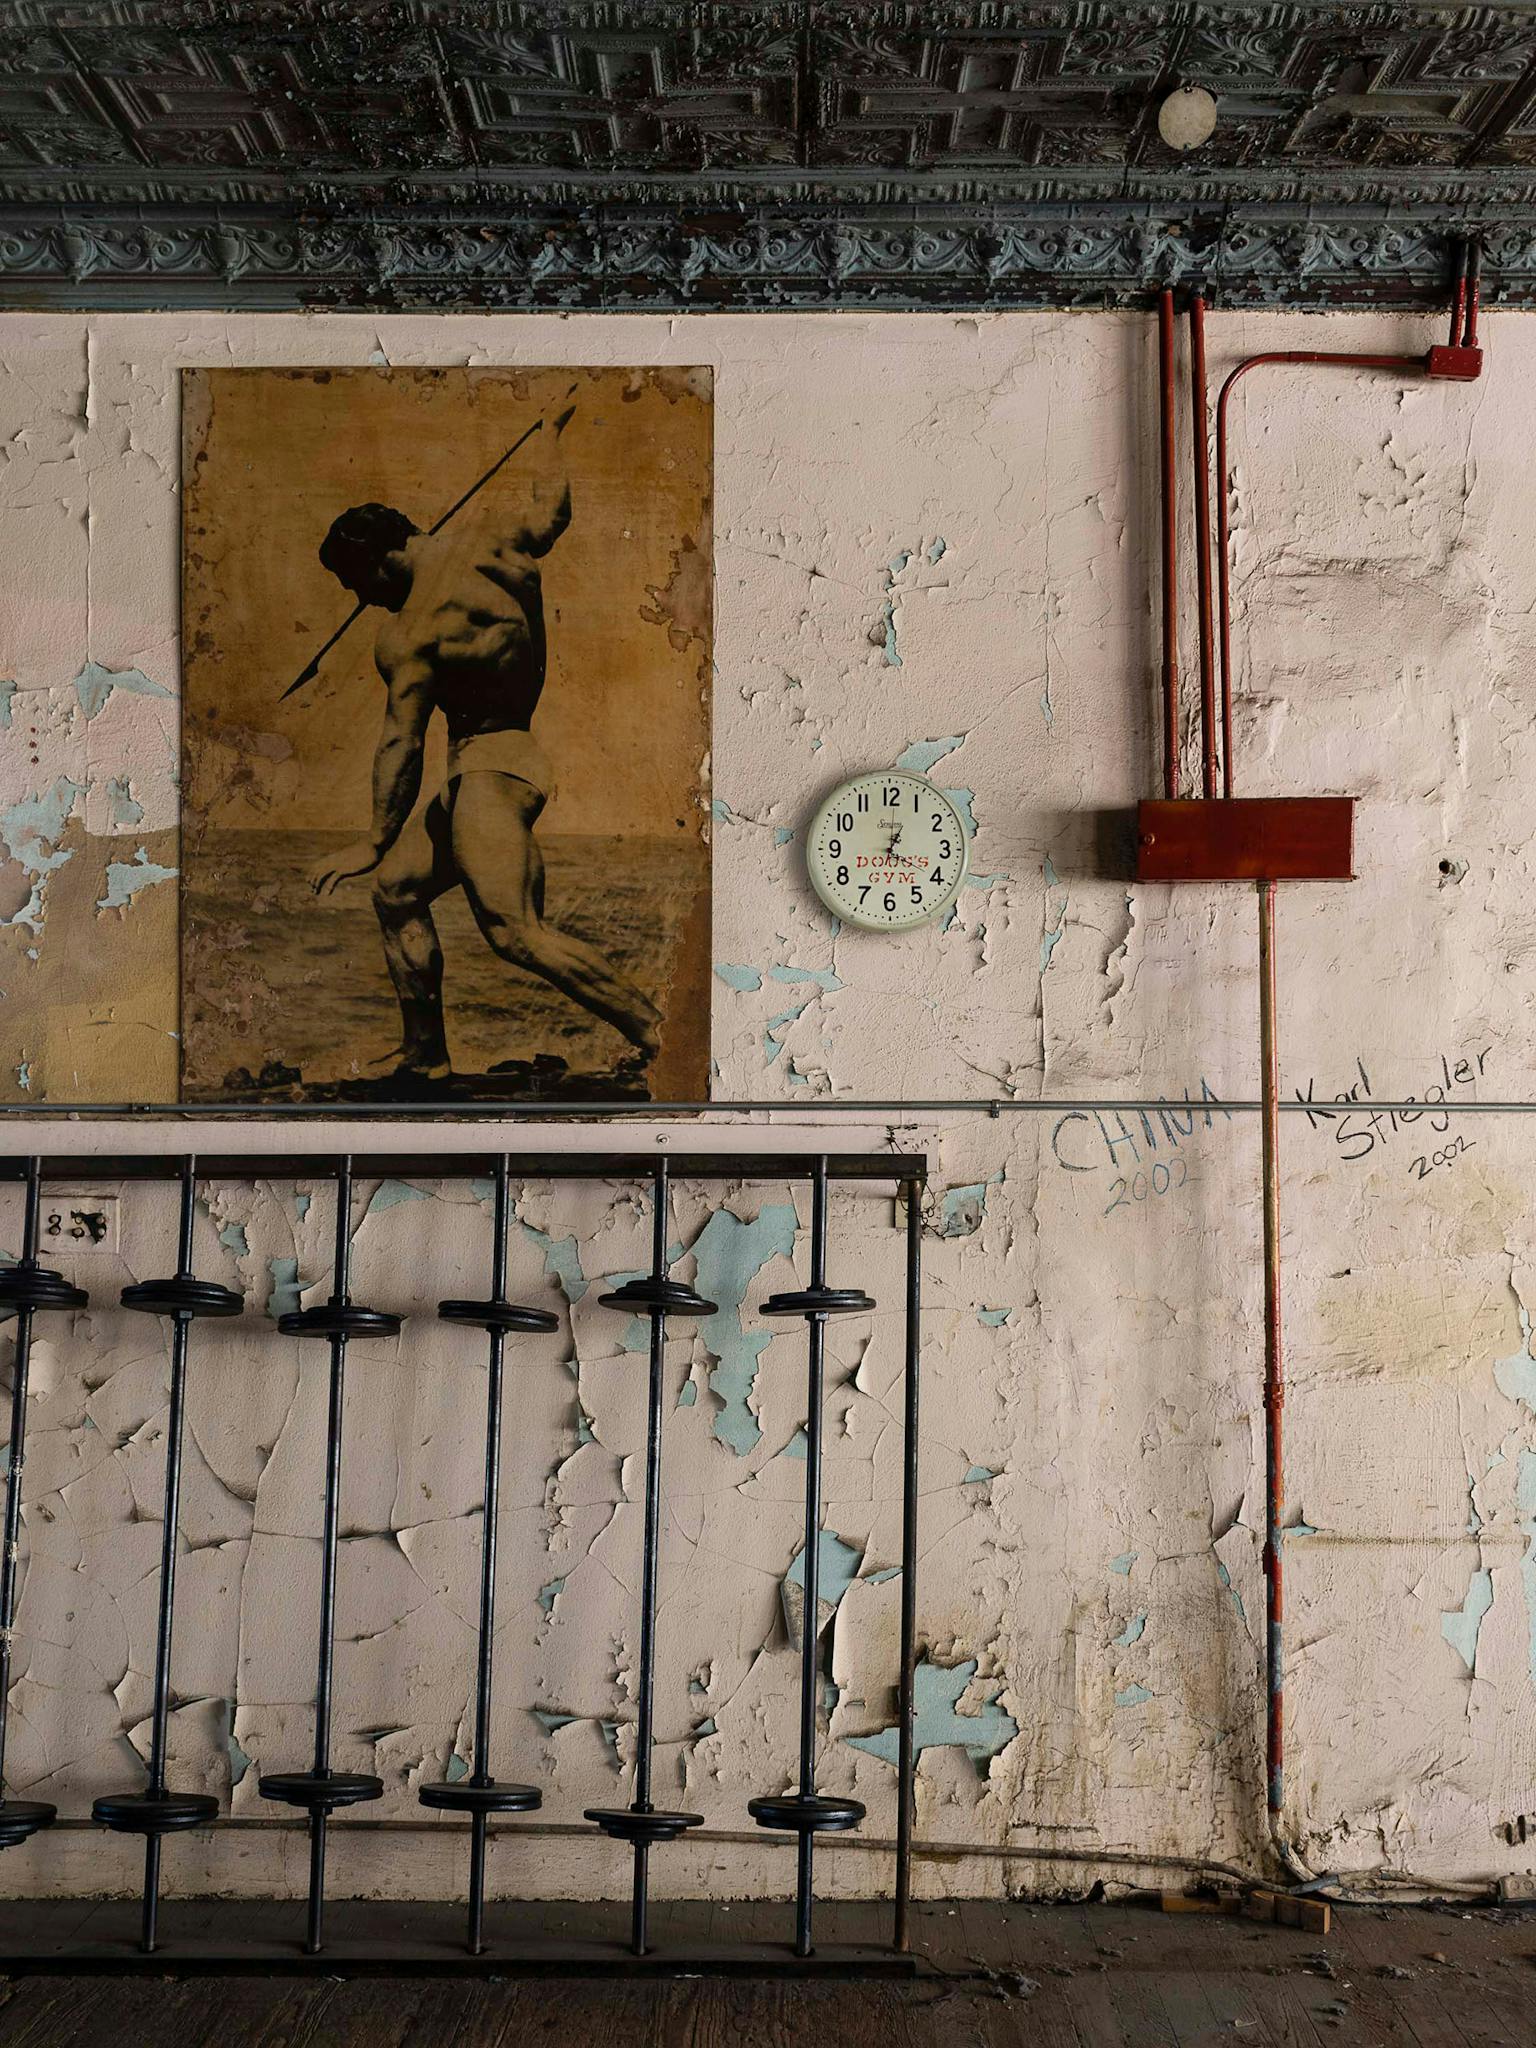 Of the more than 3,000 pictures Diamond took, this is one of his favorites. There’s a starkness to the image, but mostly a sense of decay: the faded poster (of ’36 Olympian John Grimek), the fossilized floor, all that slowly peeling paint.